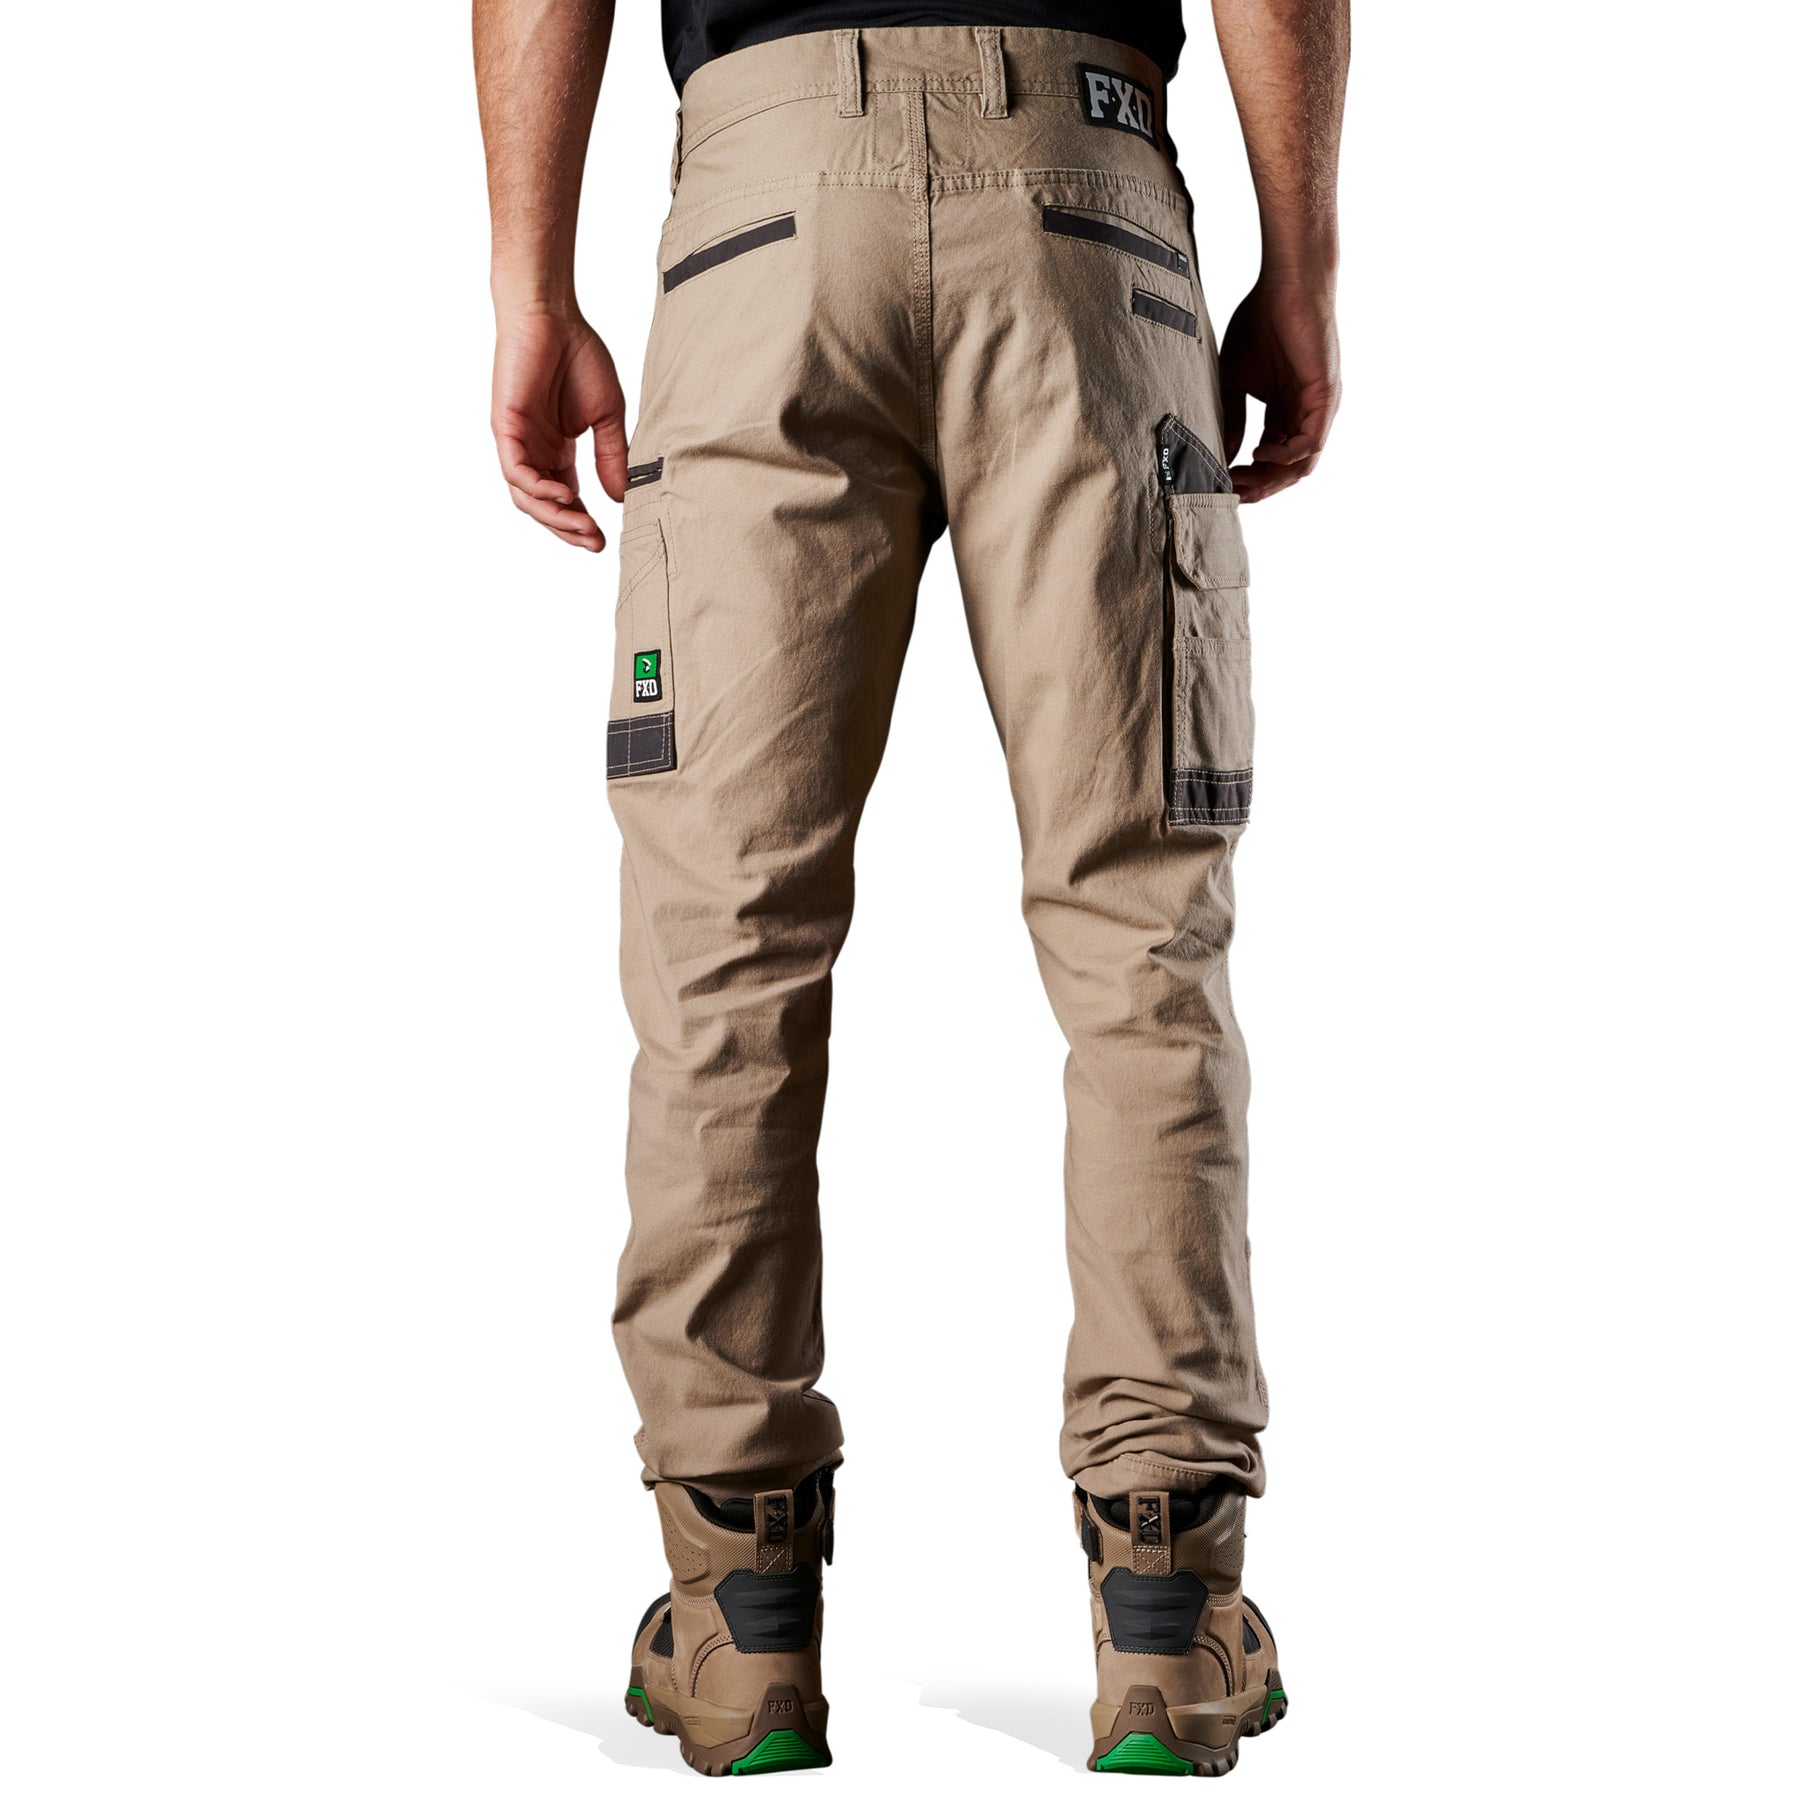 fxd stretch work pants in khaki